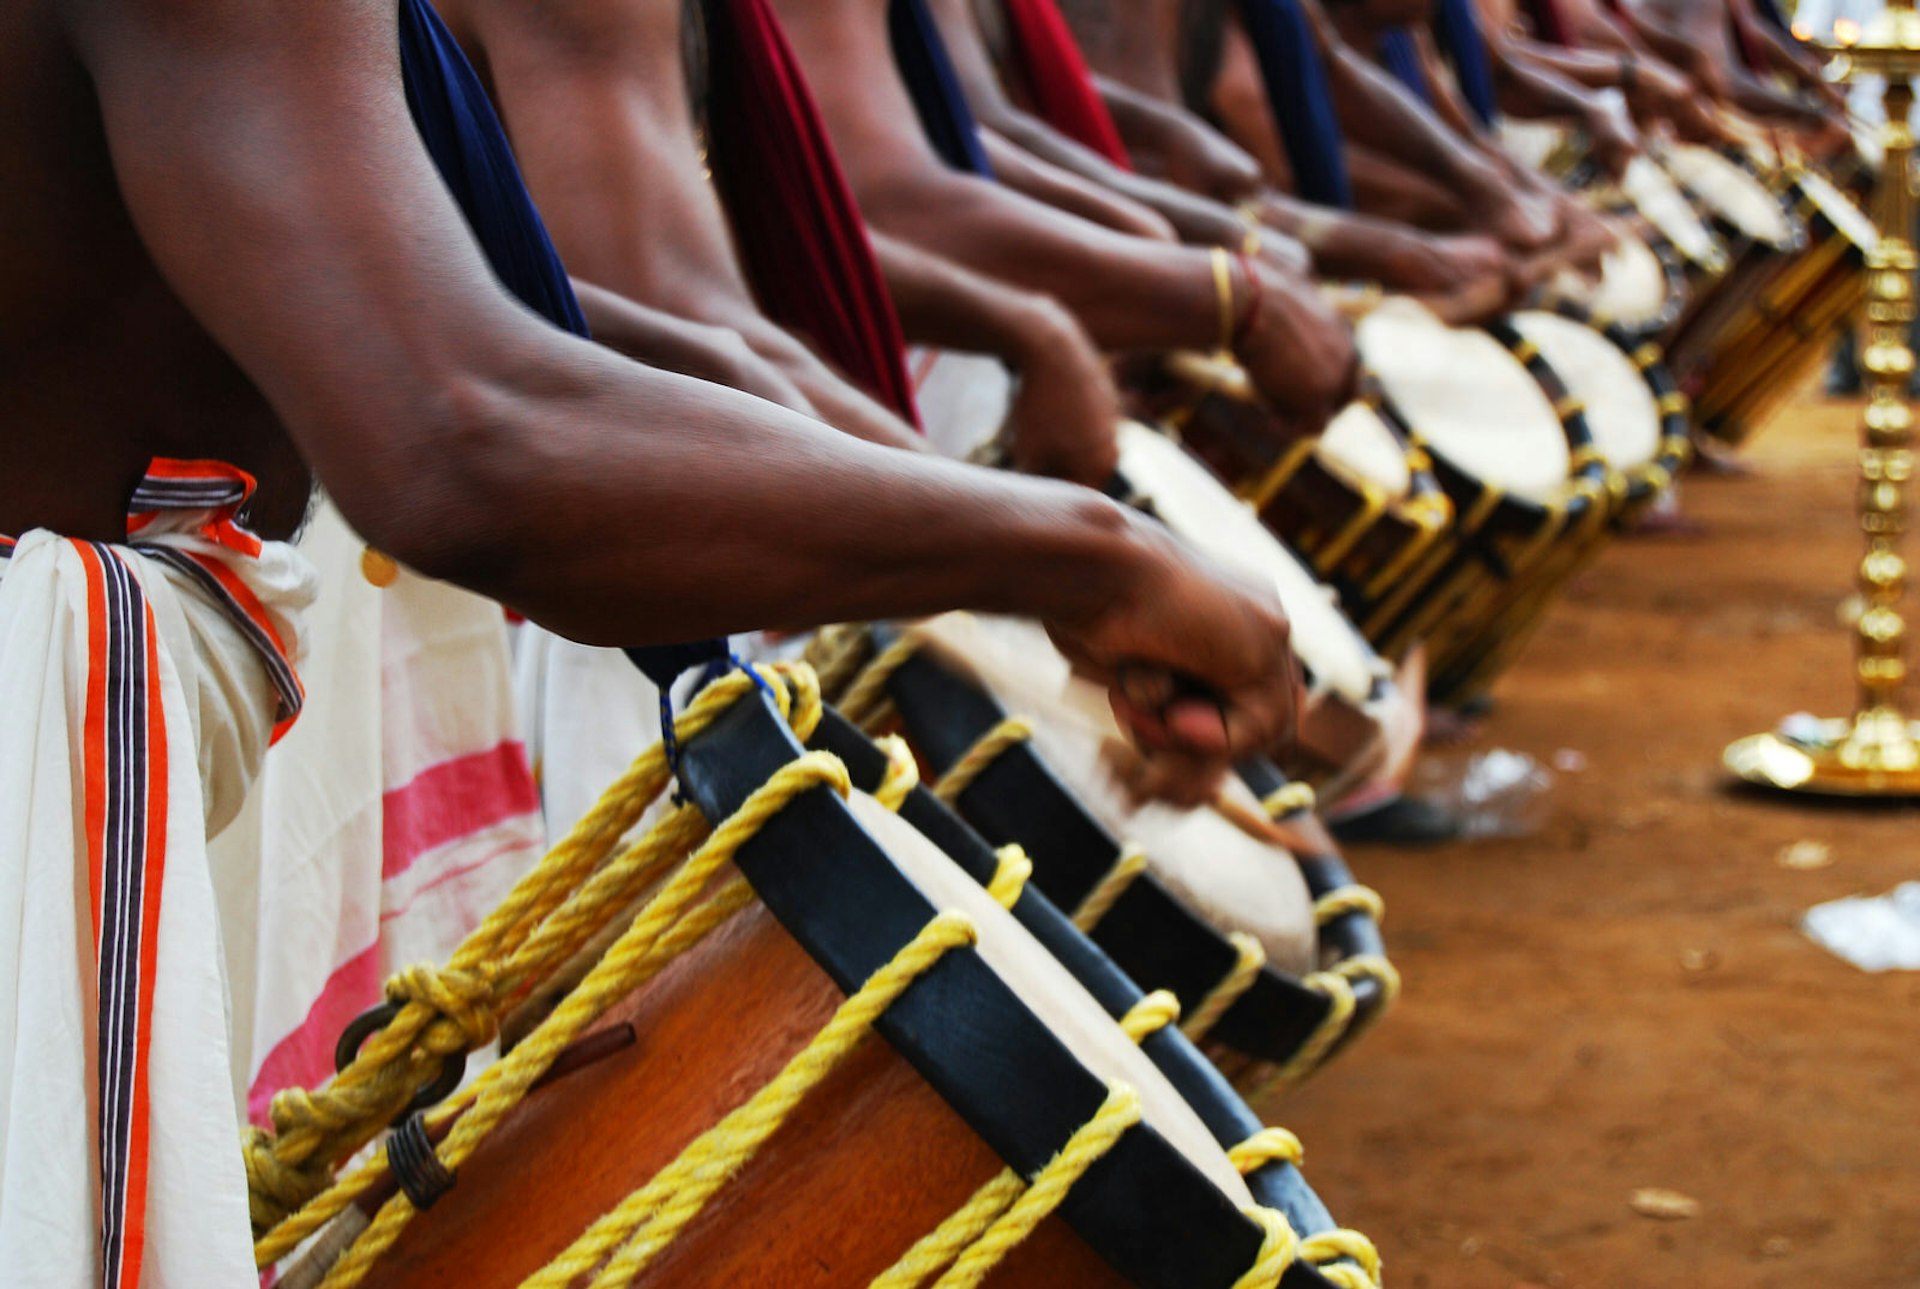 A group of musicians play the chenda melam in Kerala, India © Smevins Photography / Getty Images